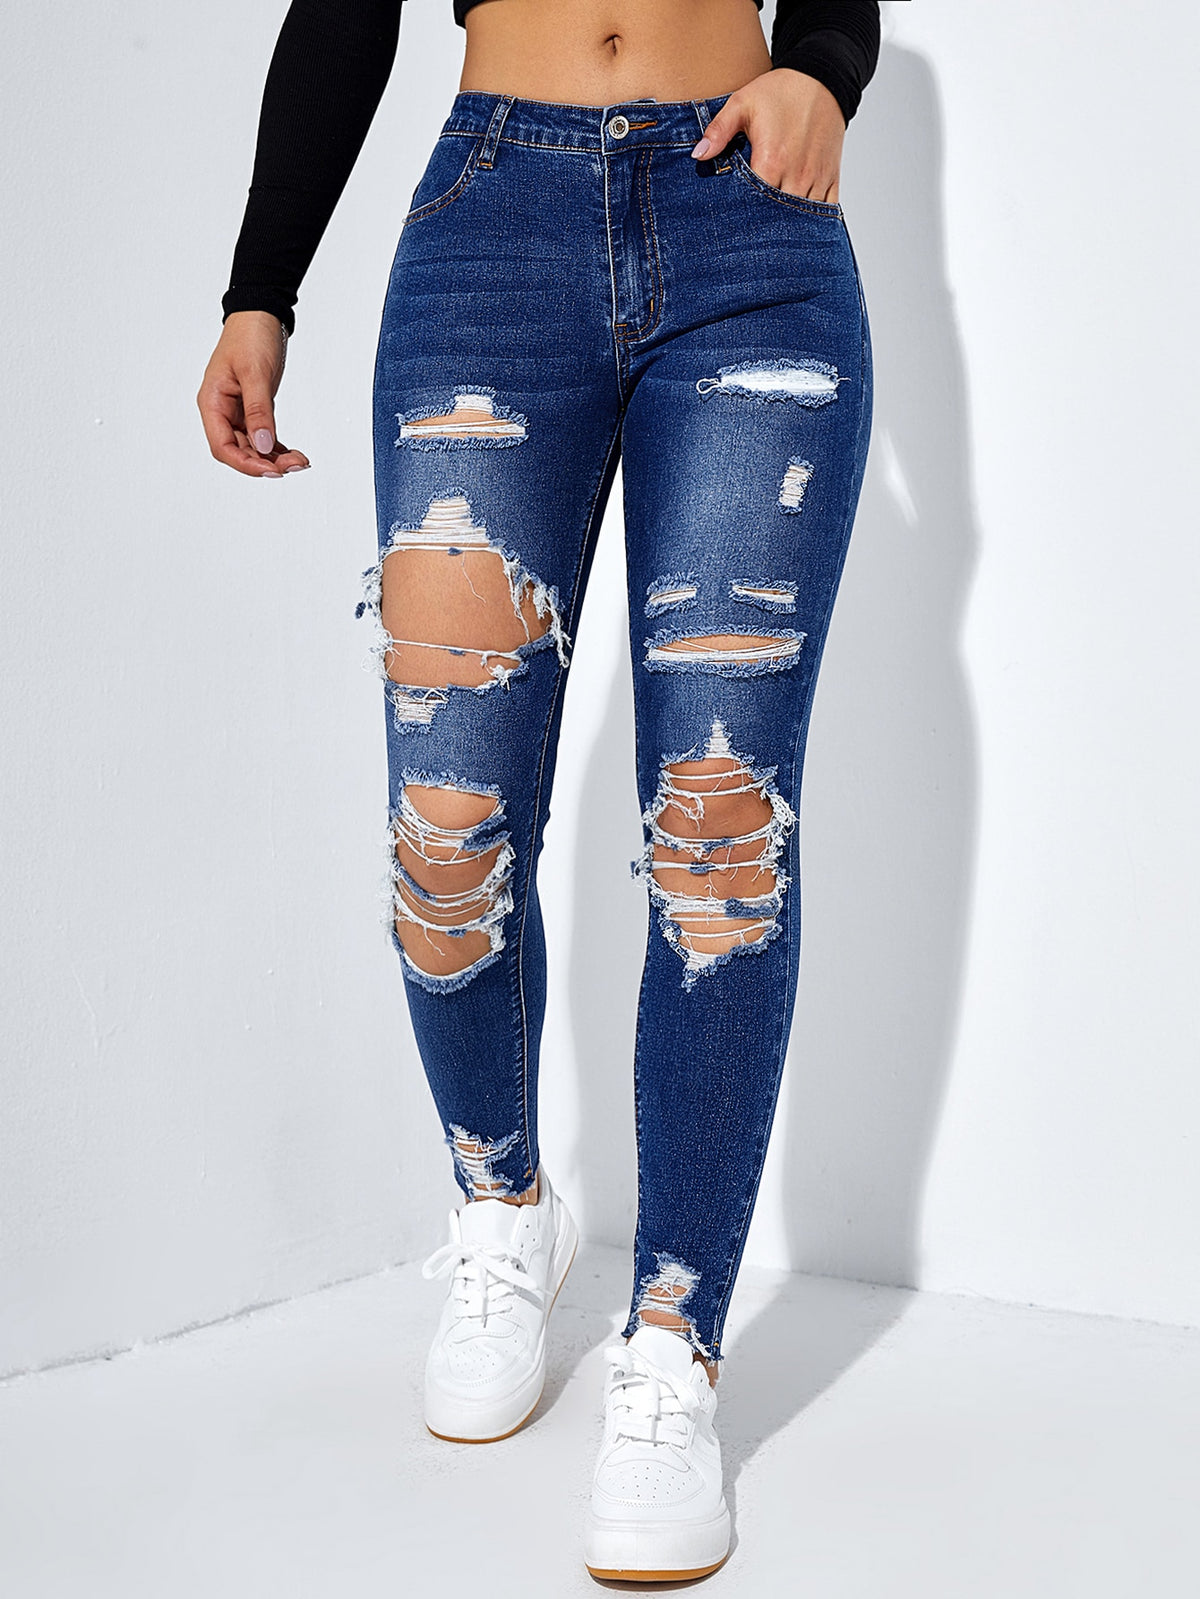 Women's Jeans - Ripped, Skinny & High-Waisted Jeans